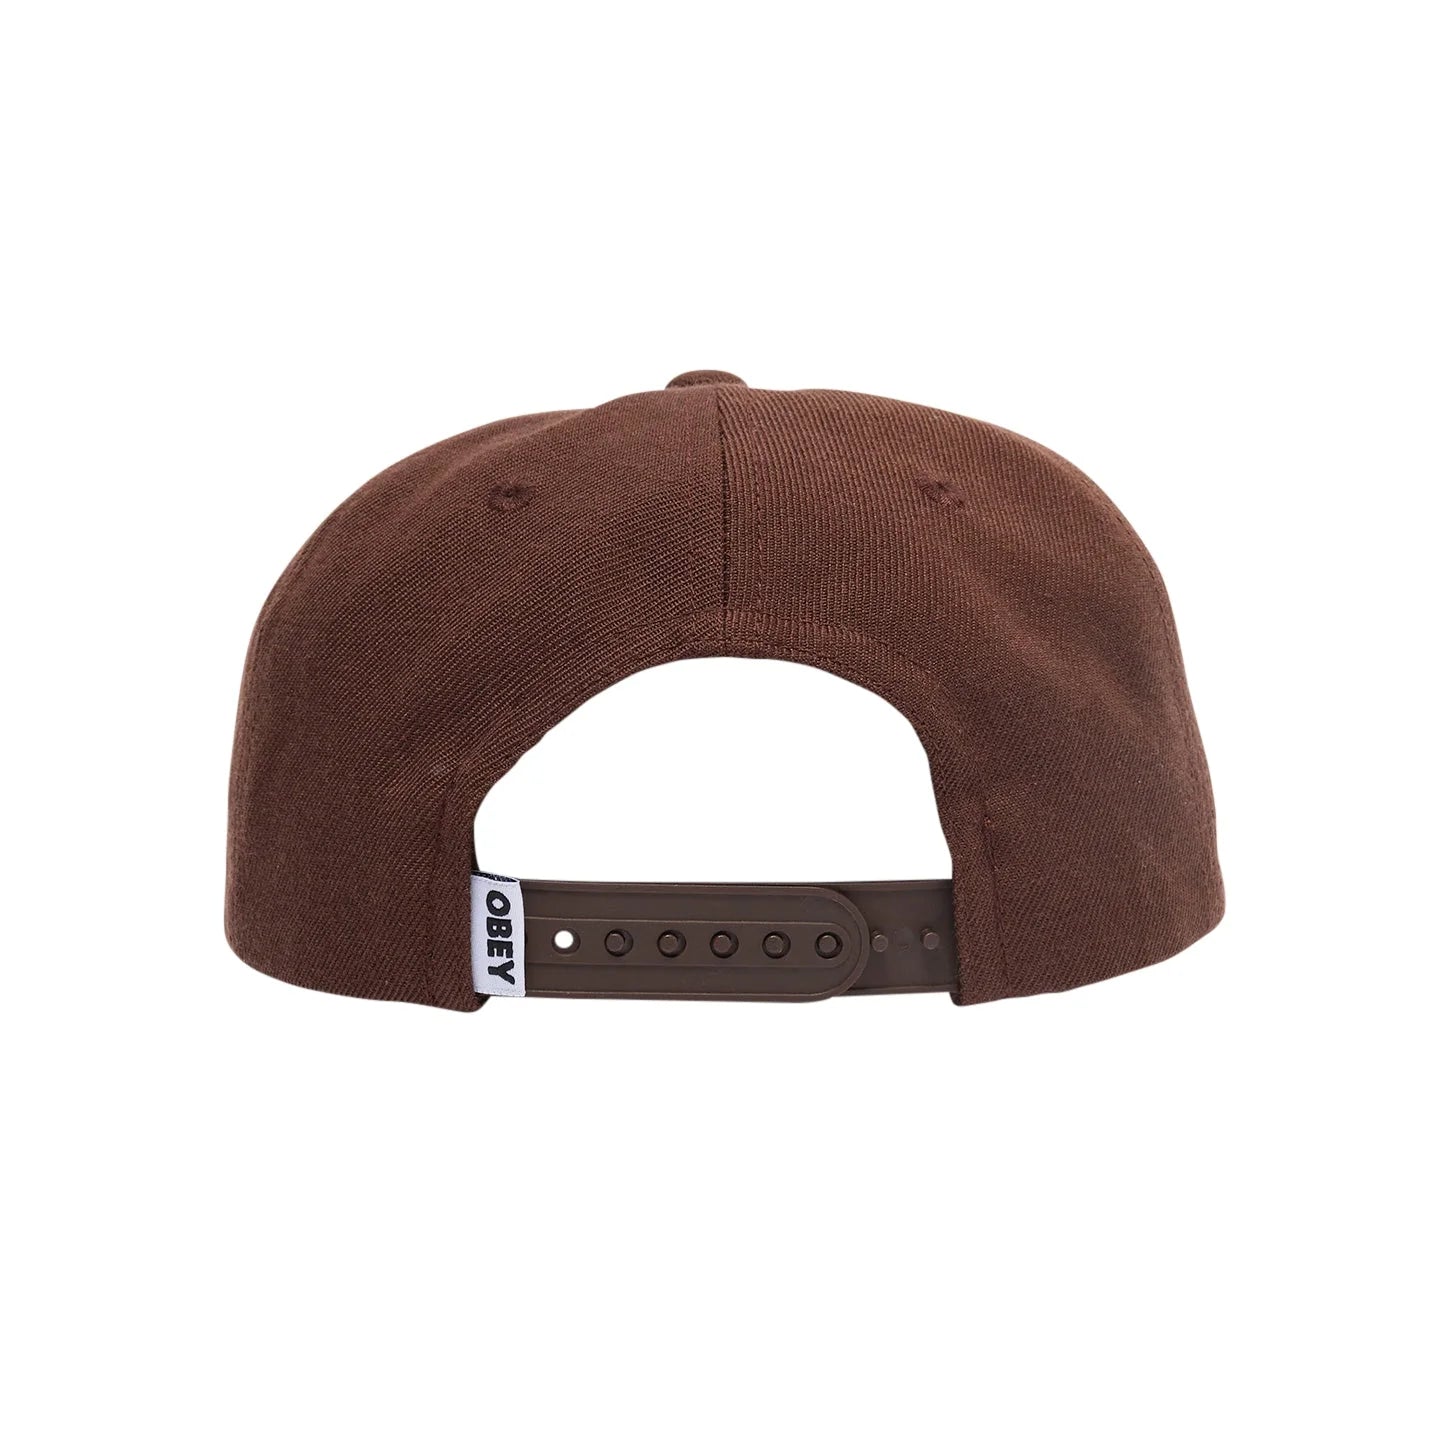 Obey Case 6 Panel Classic Snapback (Brown)